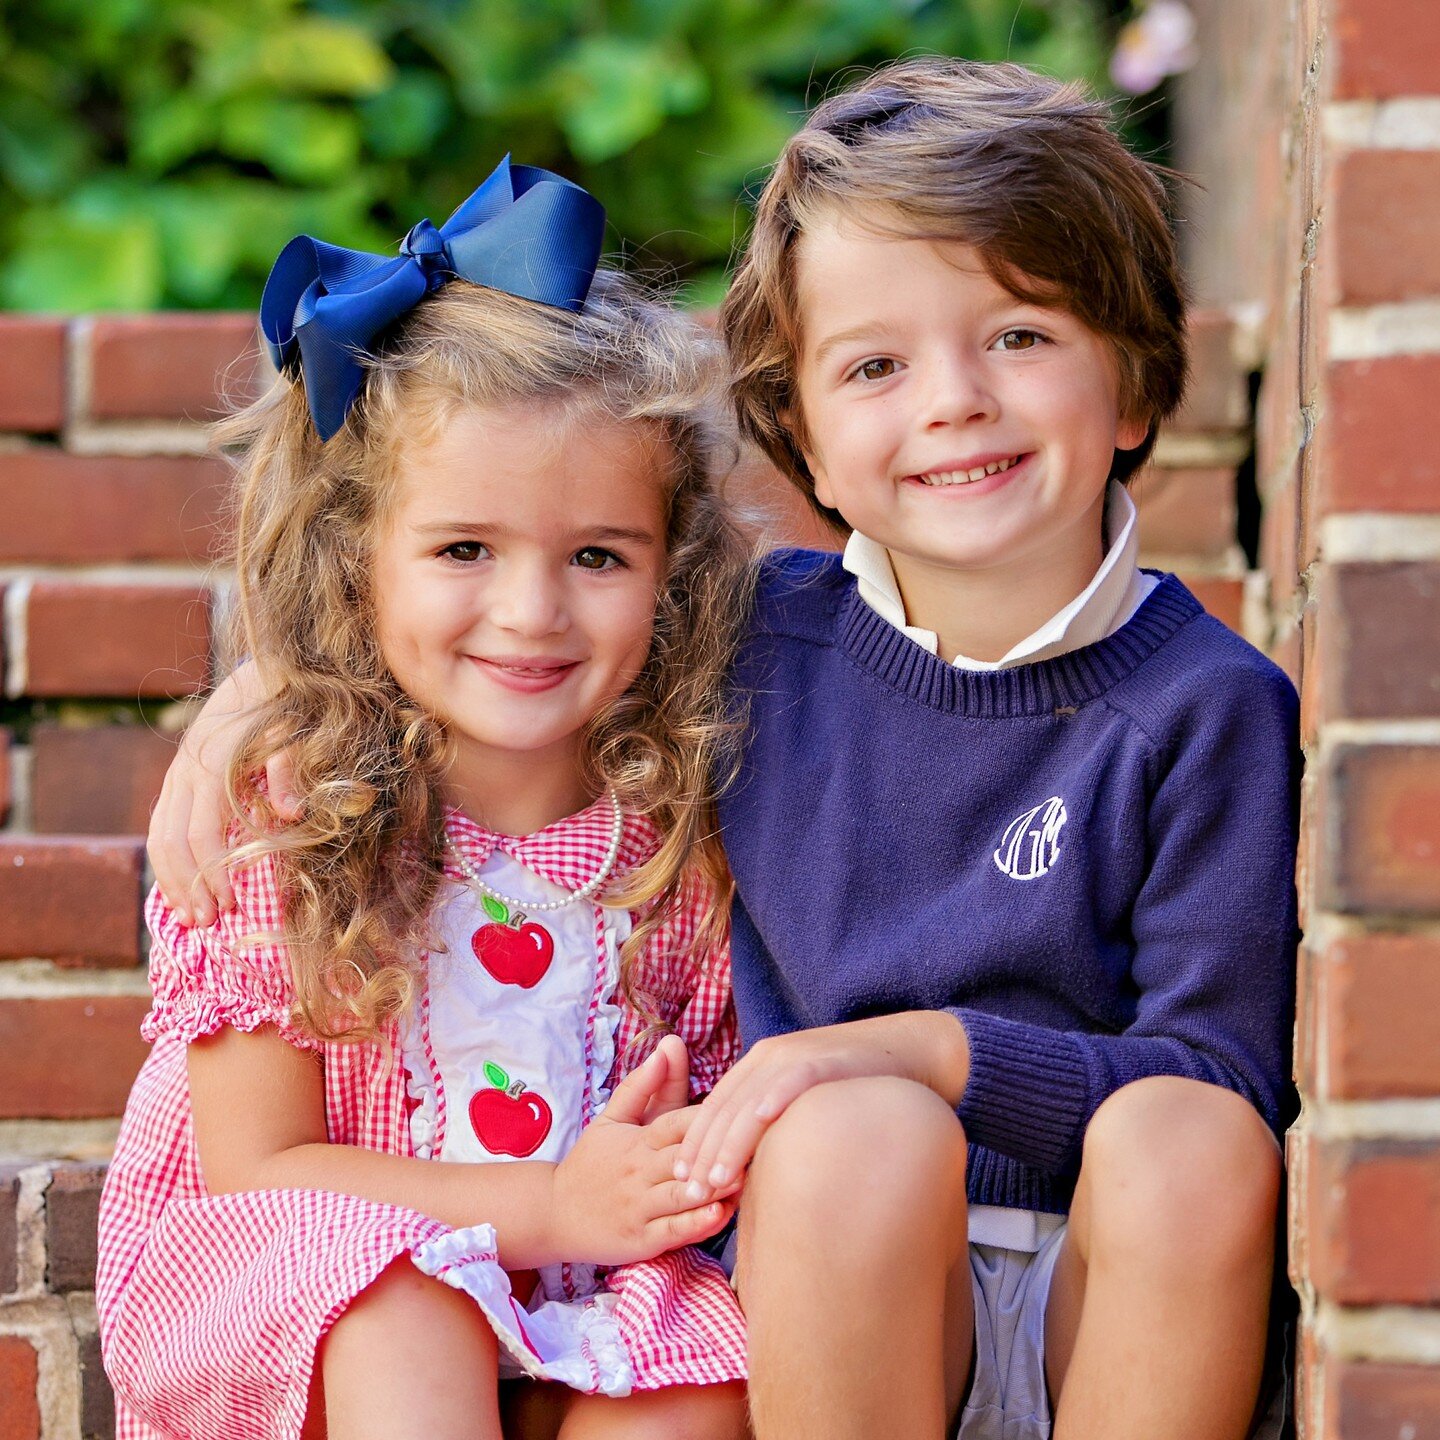 SIBLING LOVE (I die!) #Portraitphotographer - Imagine what it's like to get the chance to spend your morning with a giggly bunch of preschoolers! 😍
No stiff and awkward smiles, no 'say cheese', just connecting with them in the same way you do with A